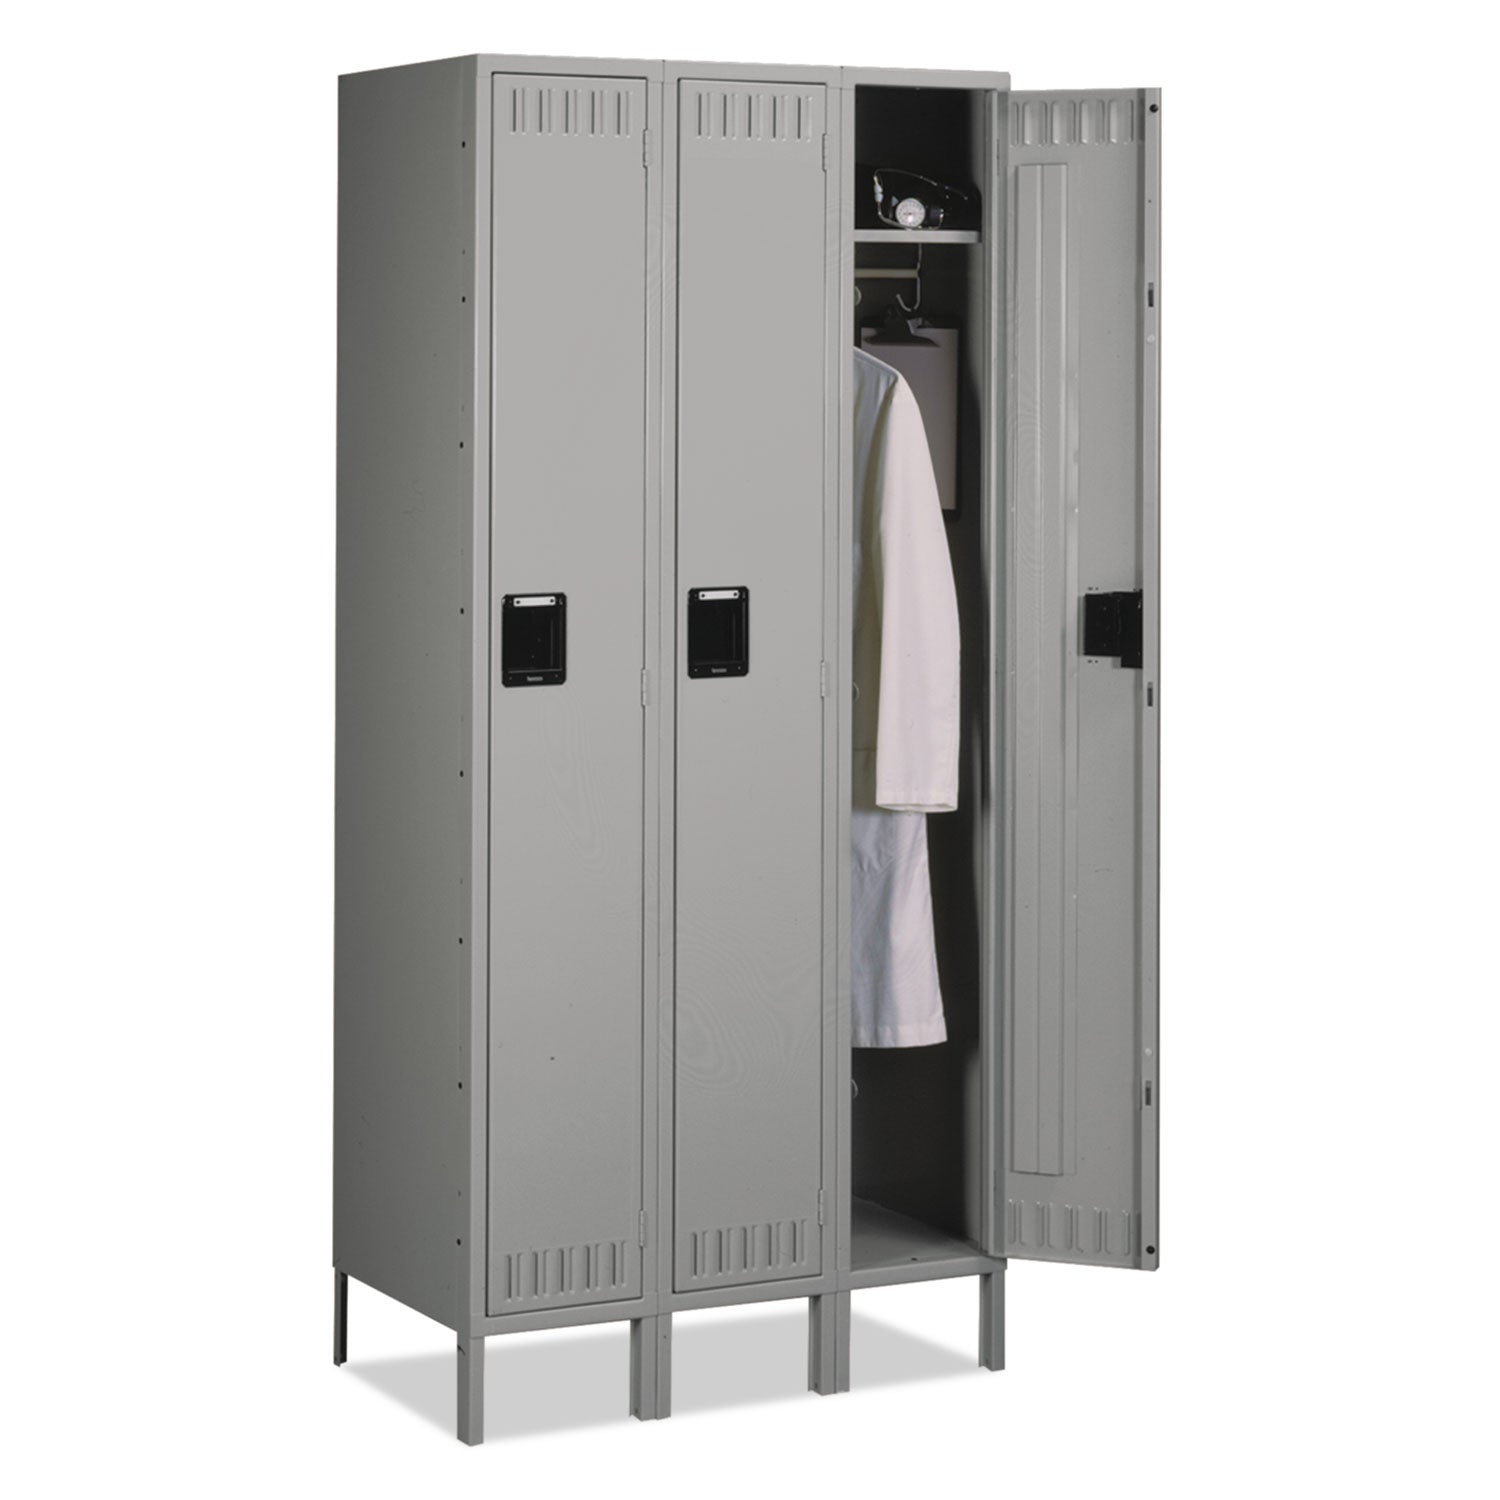 Single-Tier Locker with Legs, Three Lockers with Hat Shelves and Coat Rods, 36w x 18d x 78h, Medium Gray - 